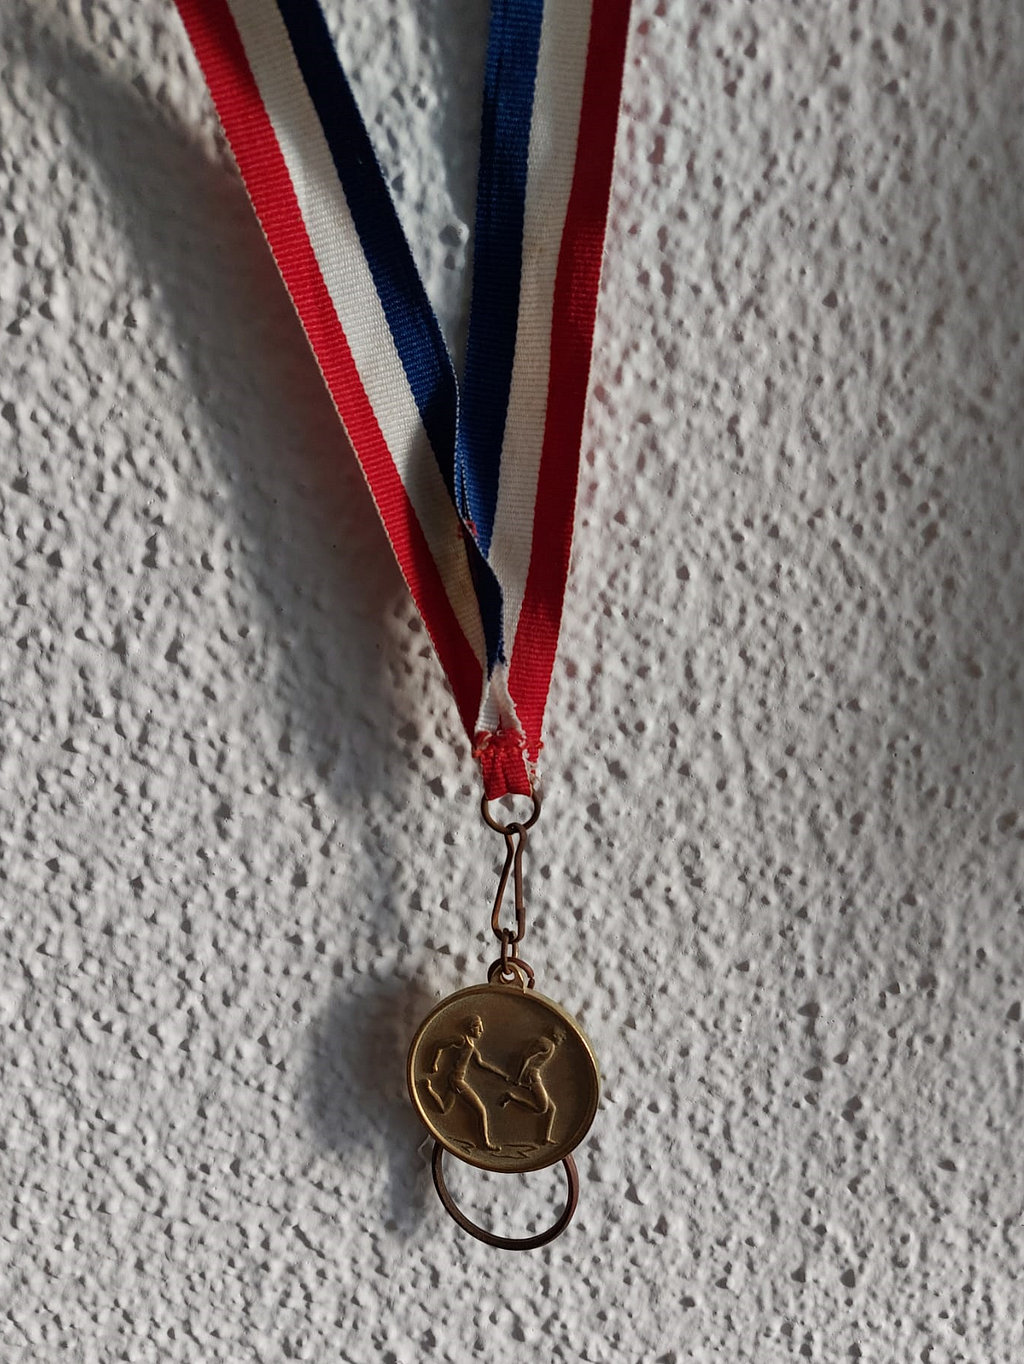 My gold medal is more than a piece of metal.